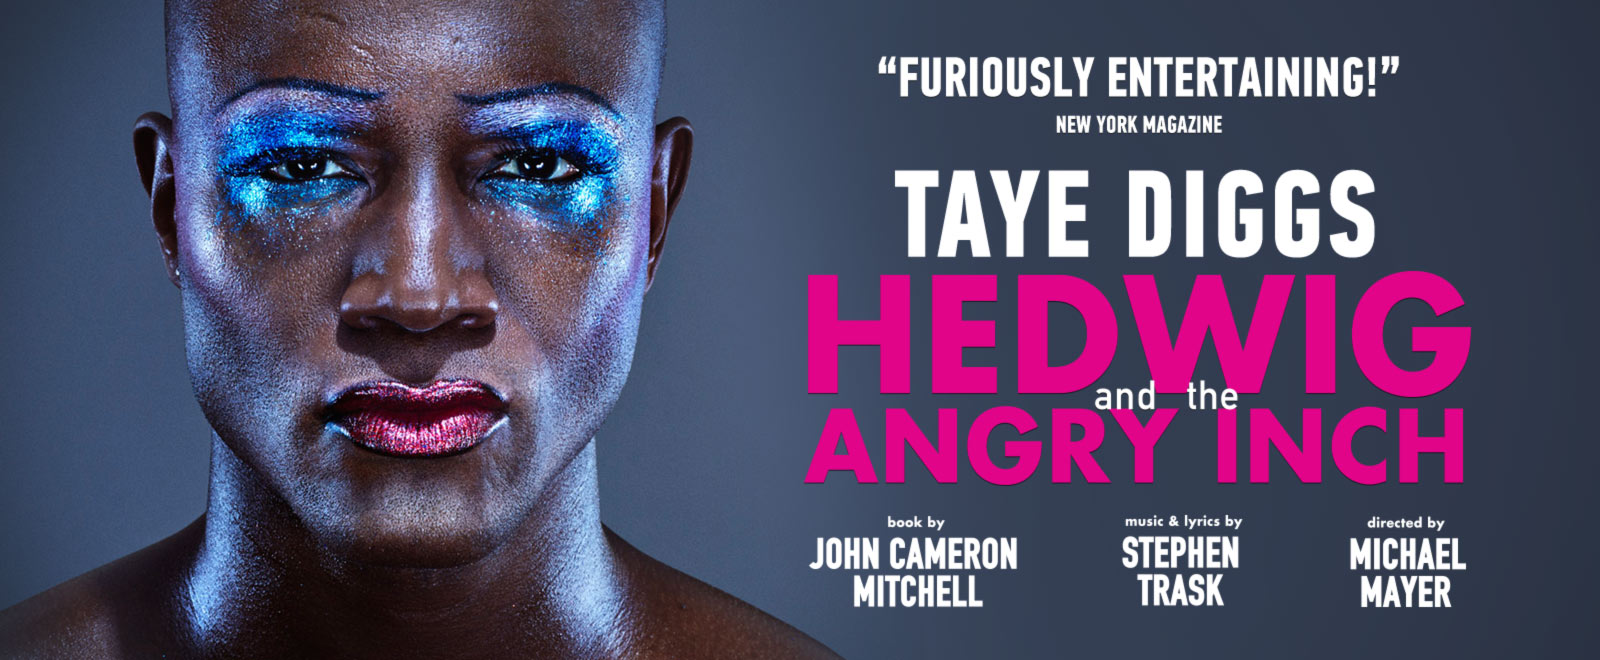 Taye Diggs is Hedwig and the angry inch musical show broadway Belasco Theatre new york city